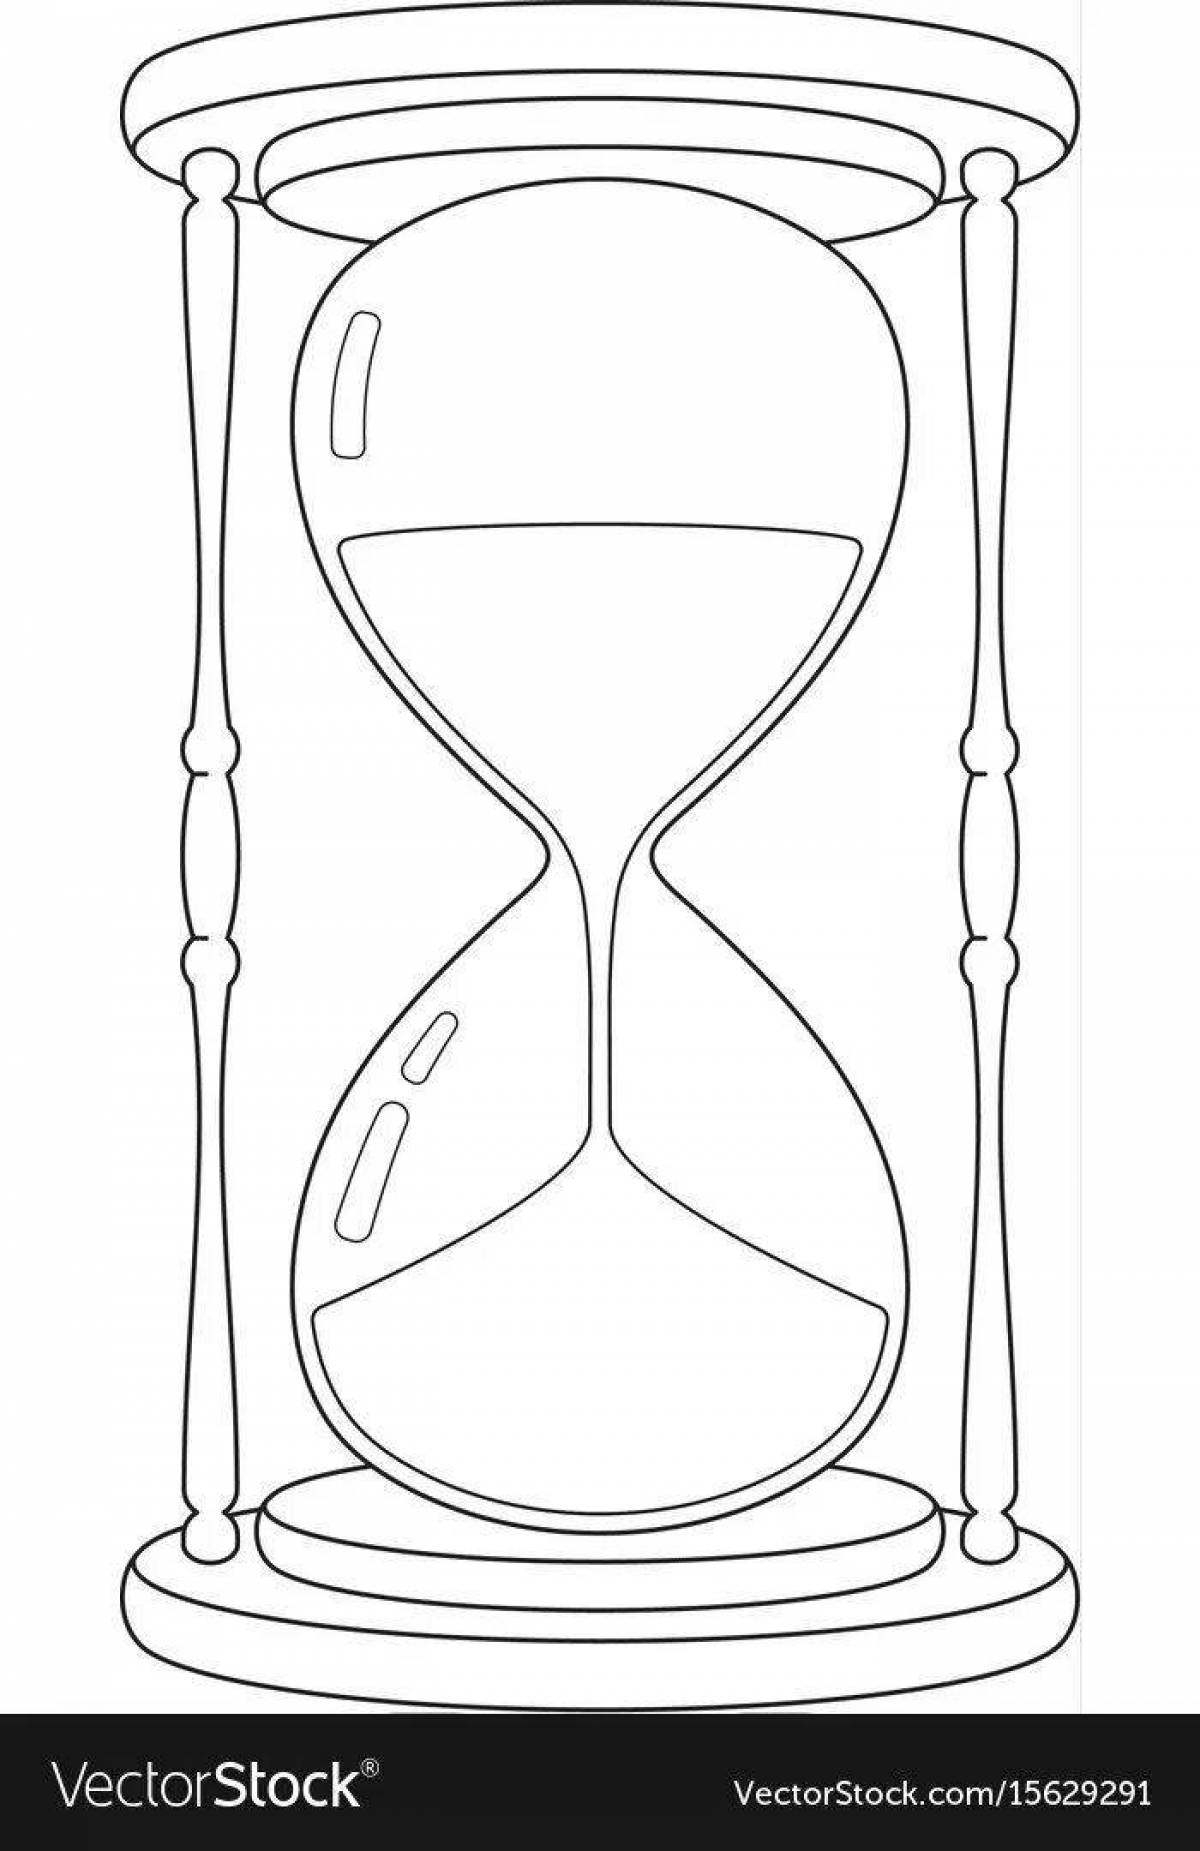 Great hourglass coloring book